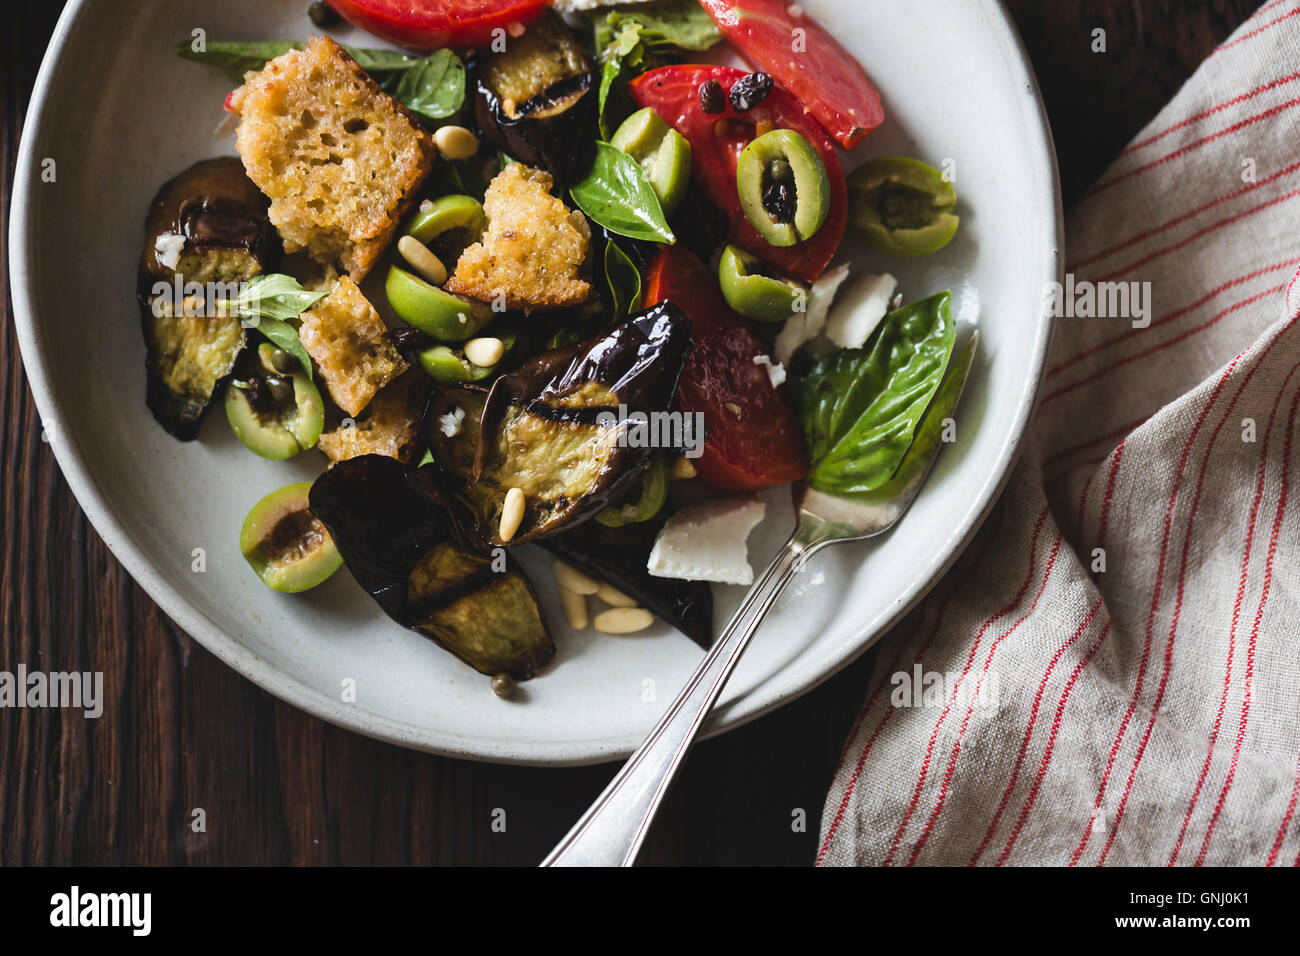 Roasted eggplant panzanella with capers, olives, and pine nuts, gluten-free. Stock Photo